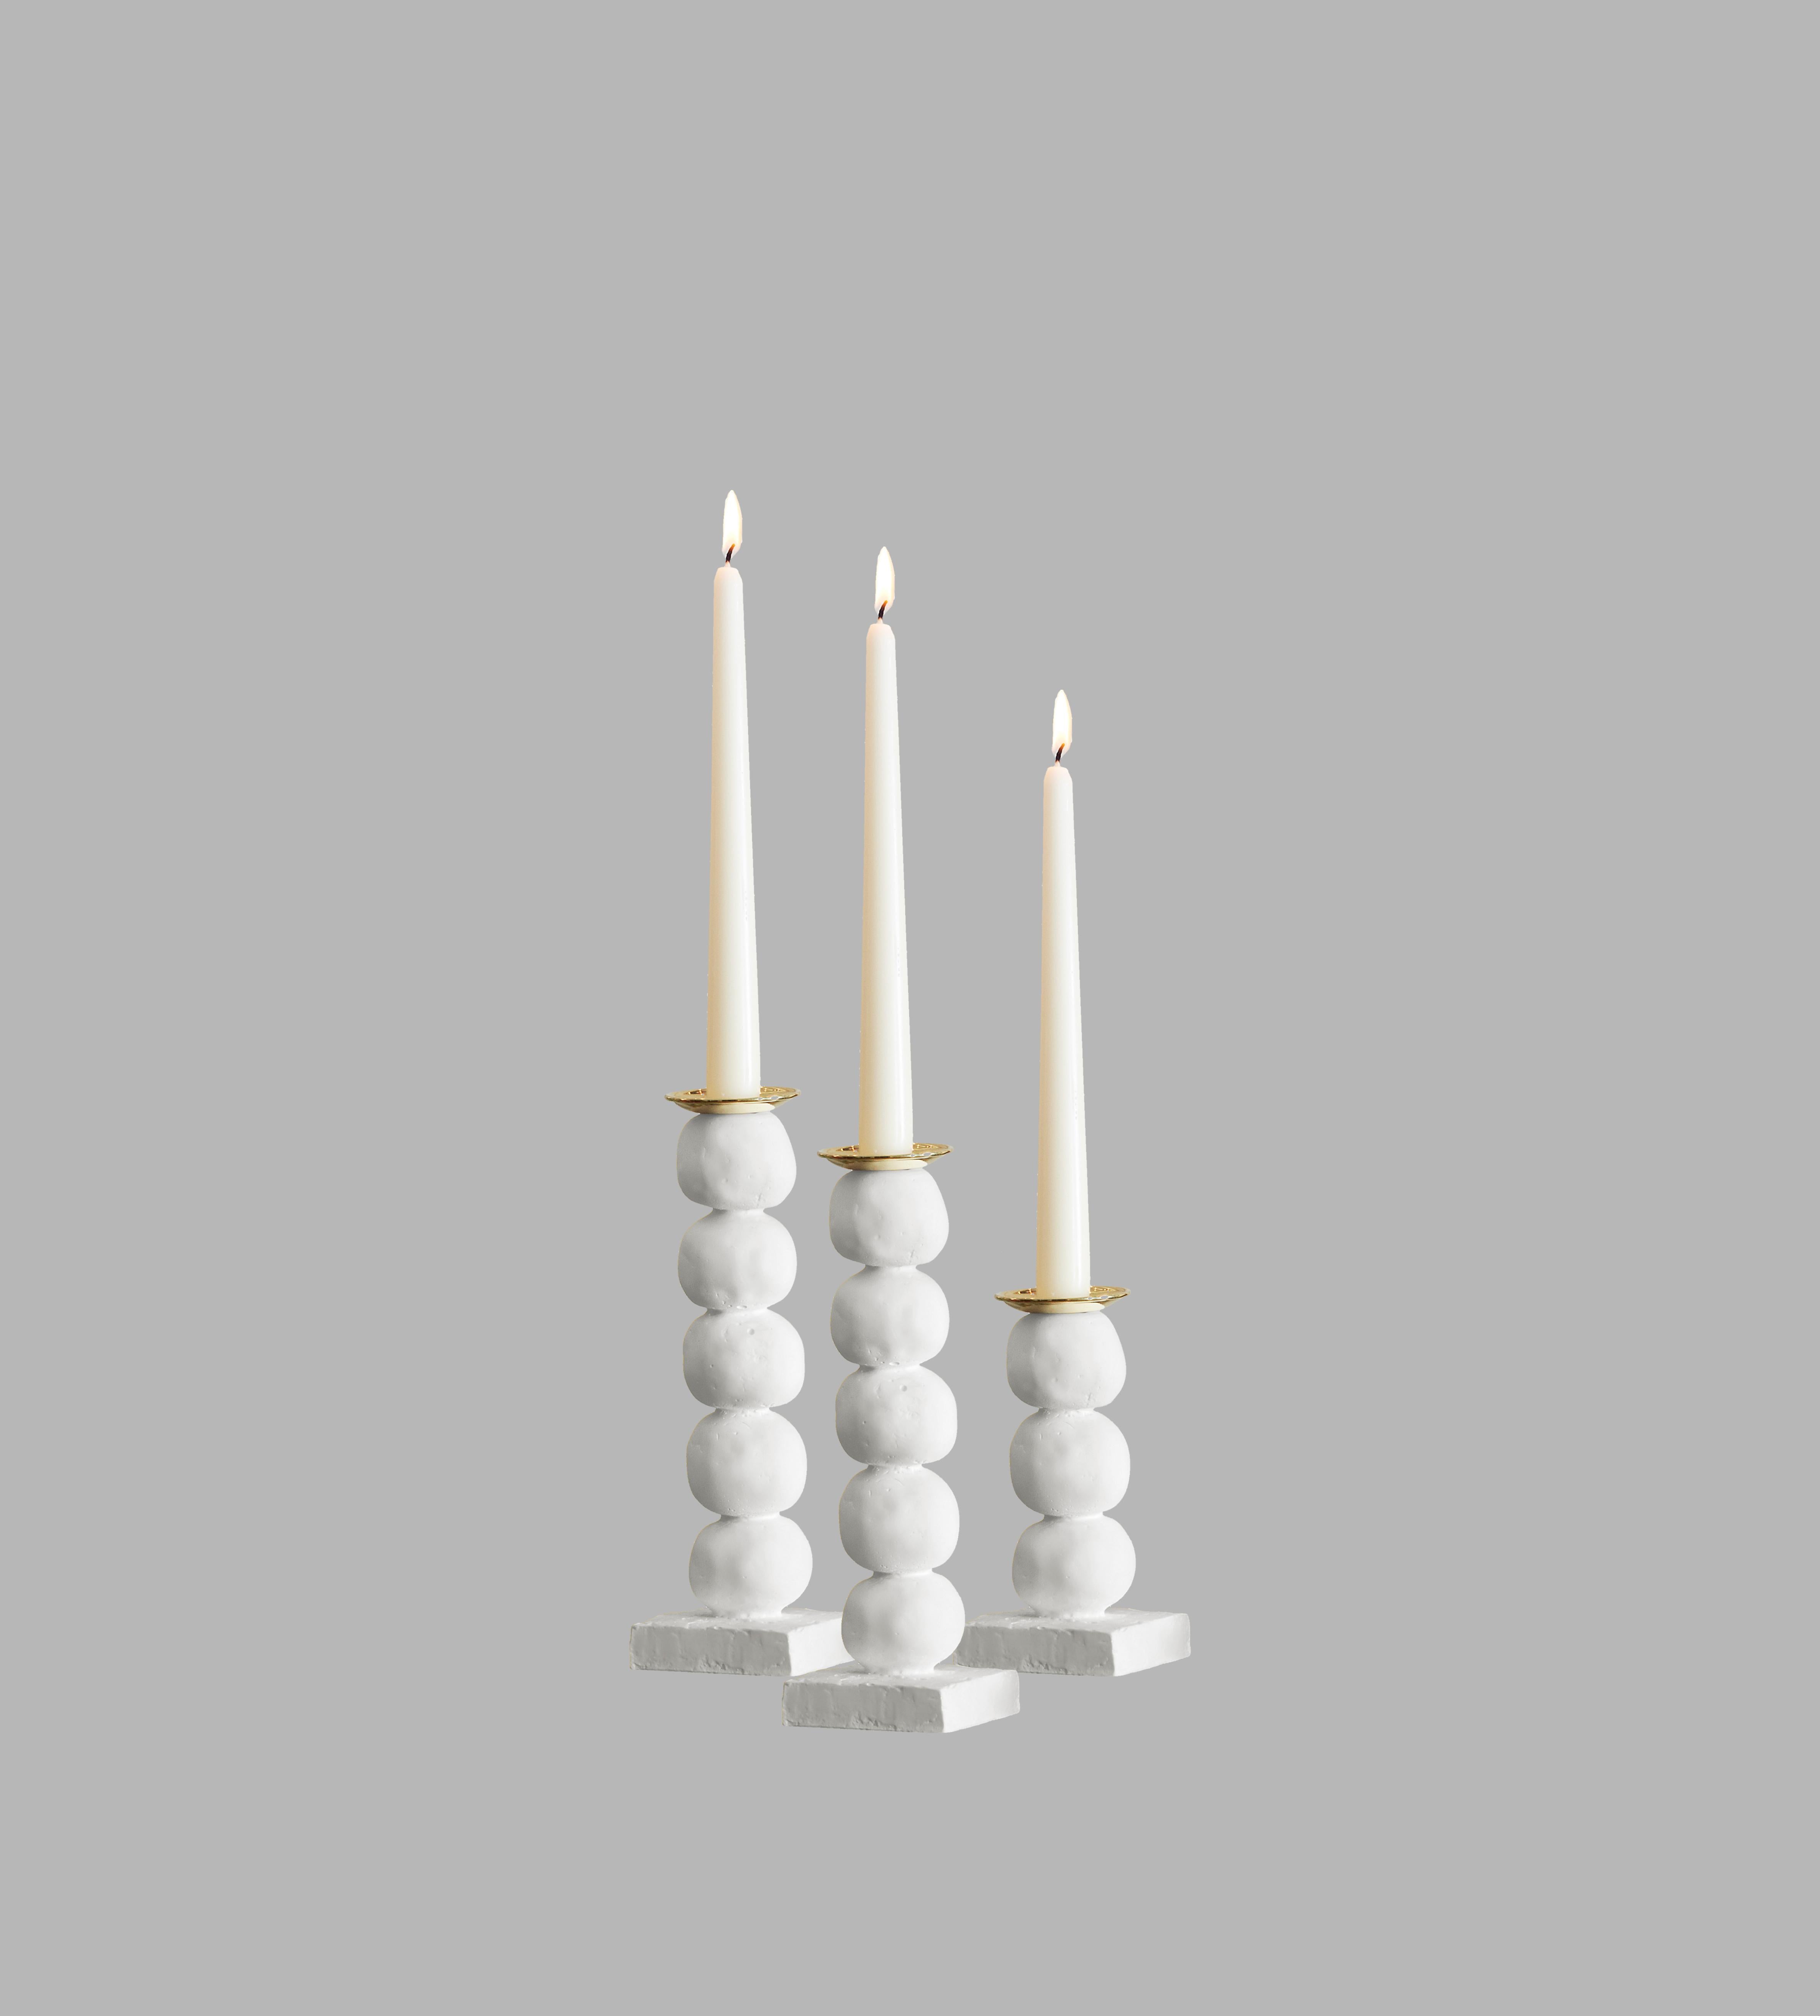 UK customers please note: displayed prices do not include VAT.

Margit Wittig has used her sculptural skills to create beautifully-crafted, well-proportioned contemporary candlesticks, which are compositions of her unique signature pearl-shaped